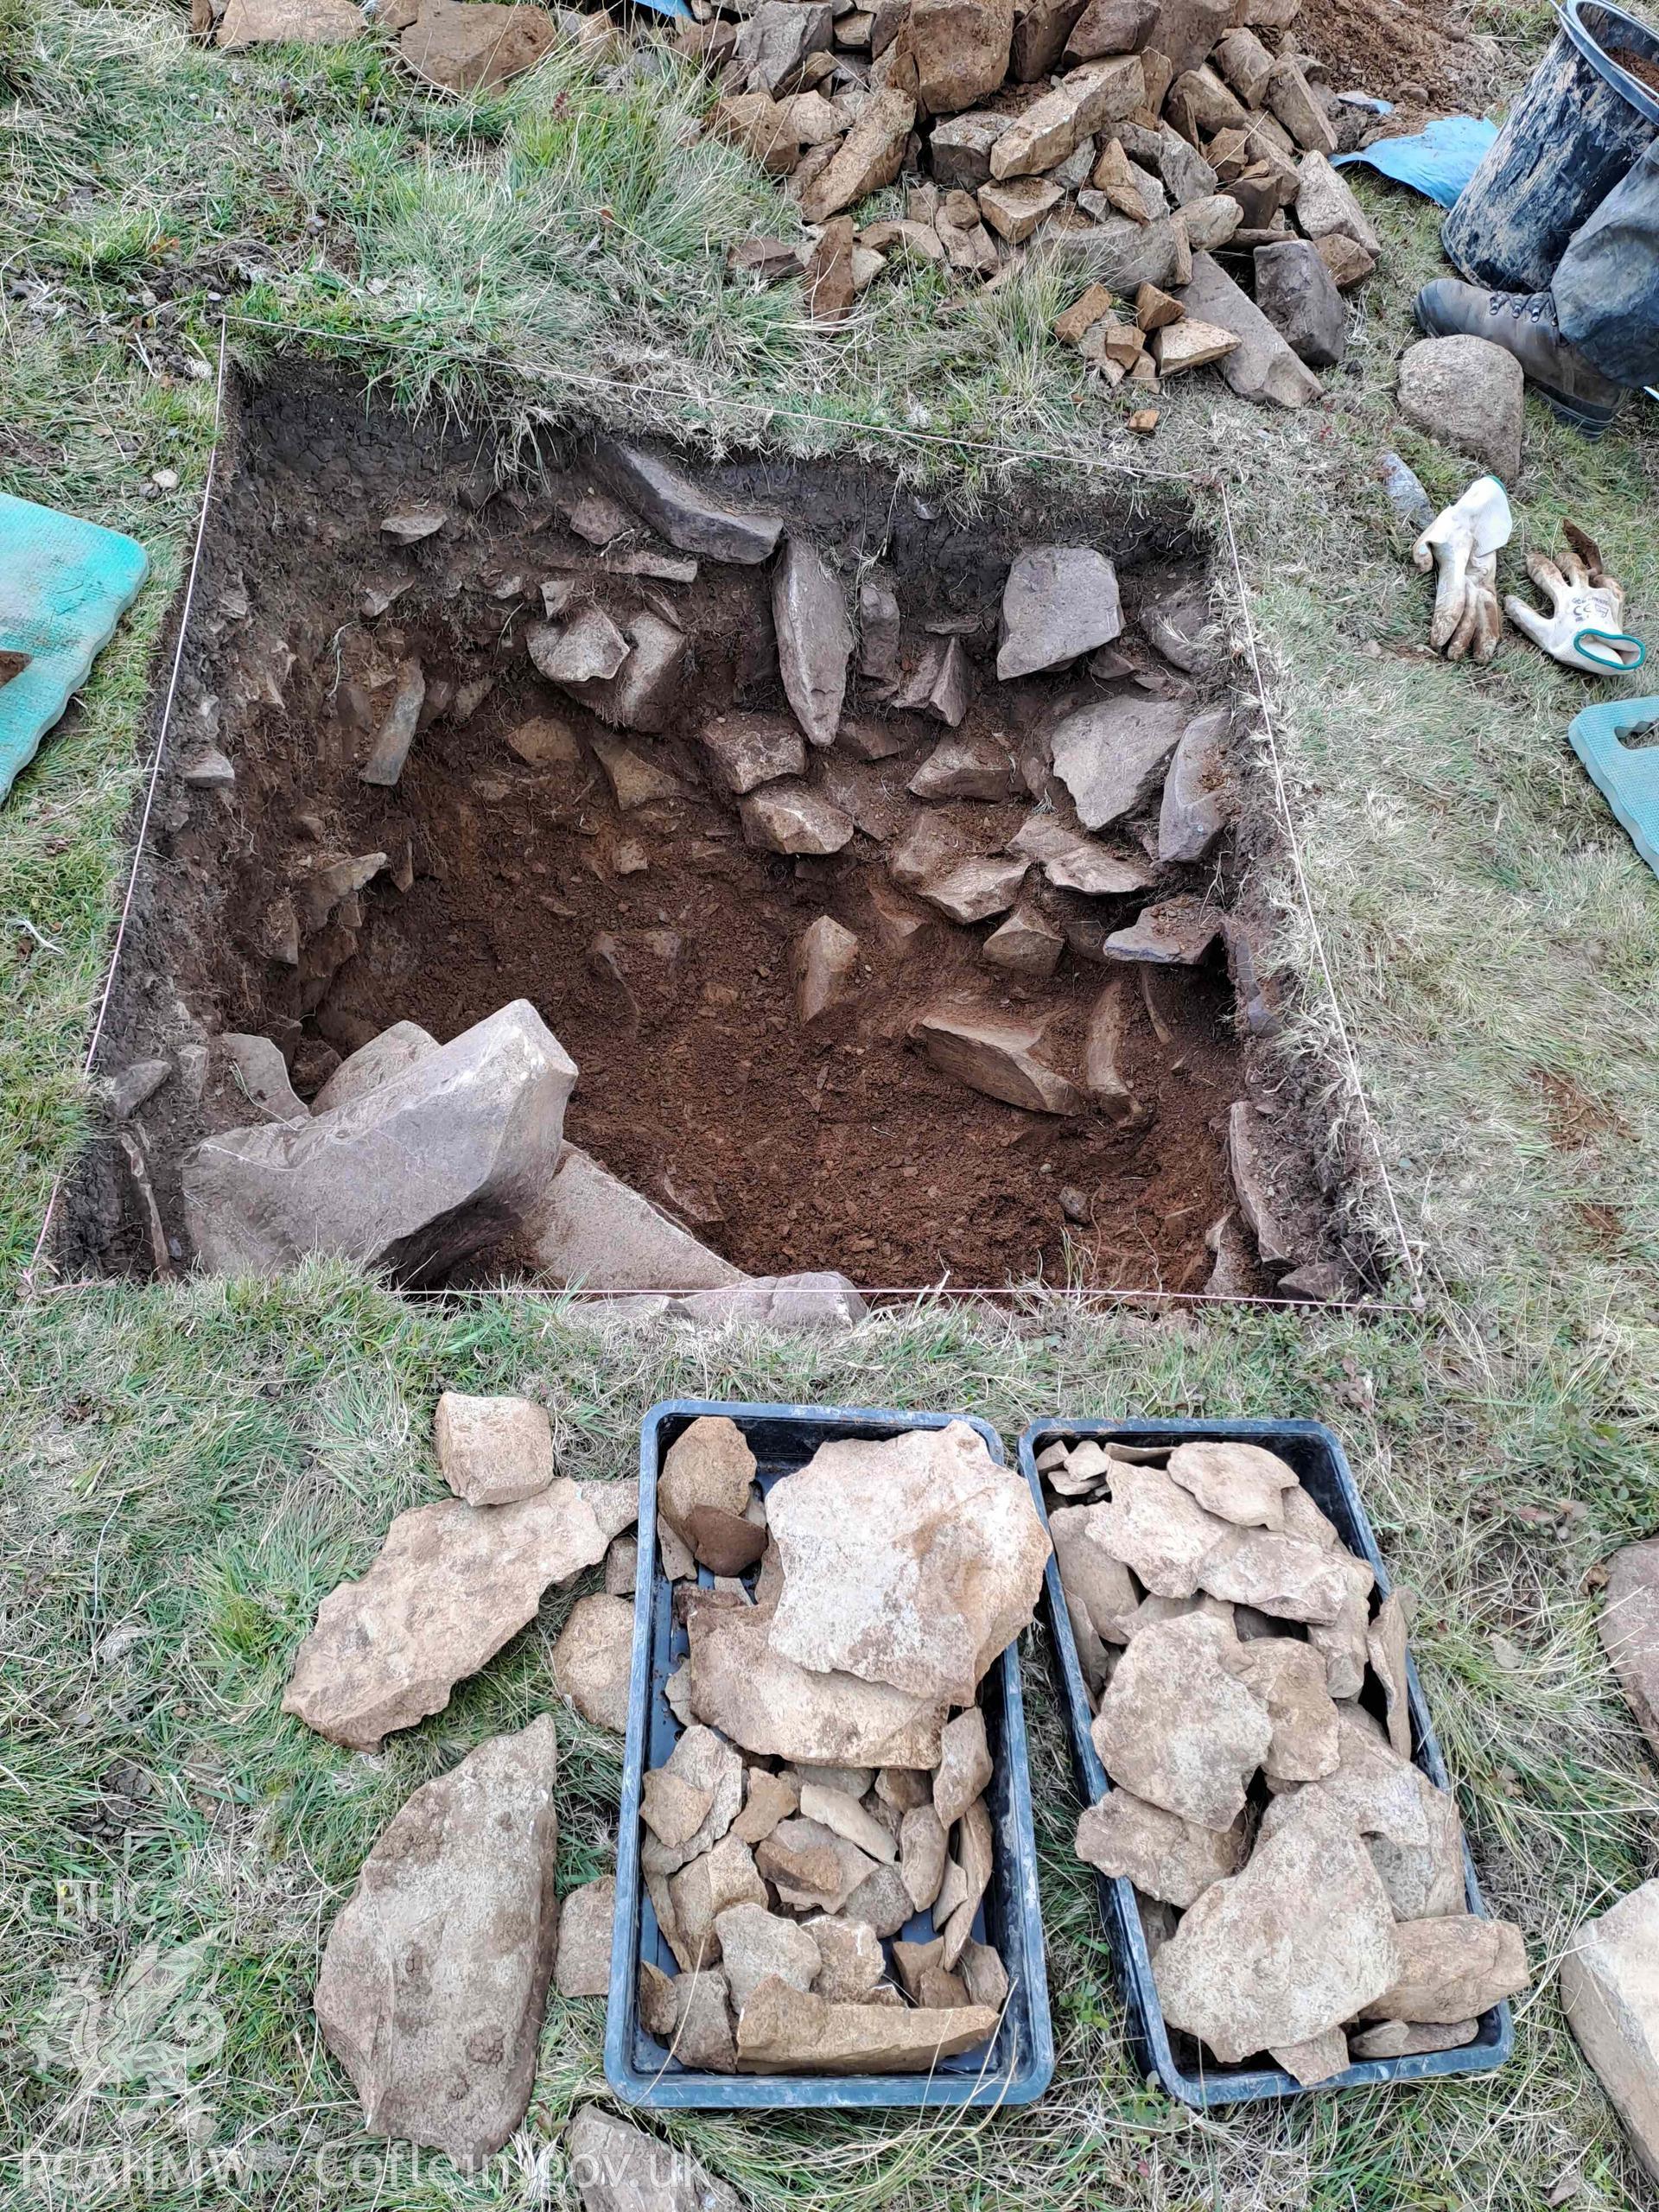 Image showing the excavation of test pits forming part of the Carneddau Scheme. The archaeological investigation, which has been undertaken with volunteers, is a collaboration between the Eryri National Park’s Carneddau Scheme, funded by the National Lottery Heritage Fund, and Gwynedd Archaeological Trust, funded by Cadw. It aims to identify the extent of the Neolithic axe-working landscape about Penmaenmawr and Llanfairfechan. The workings were previously thought to be focussed only on the area of Graiglwyd axe factory.